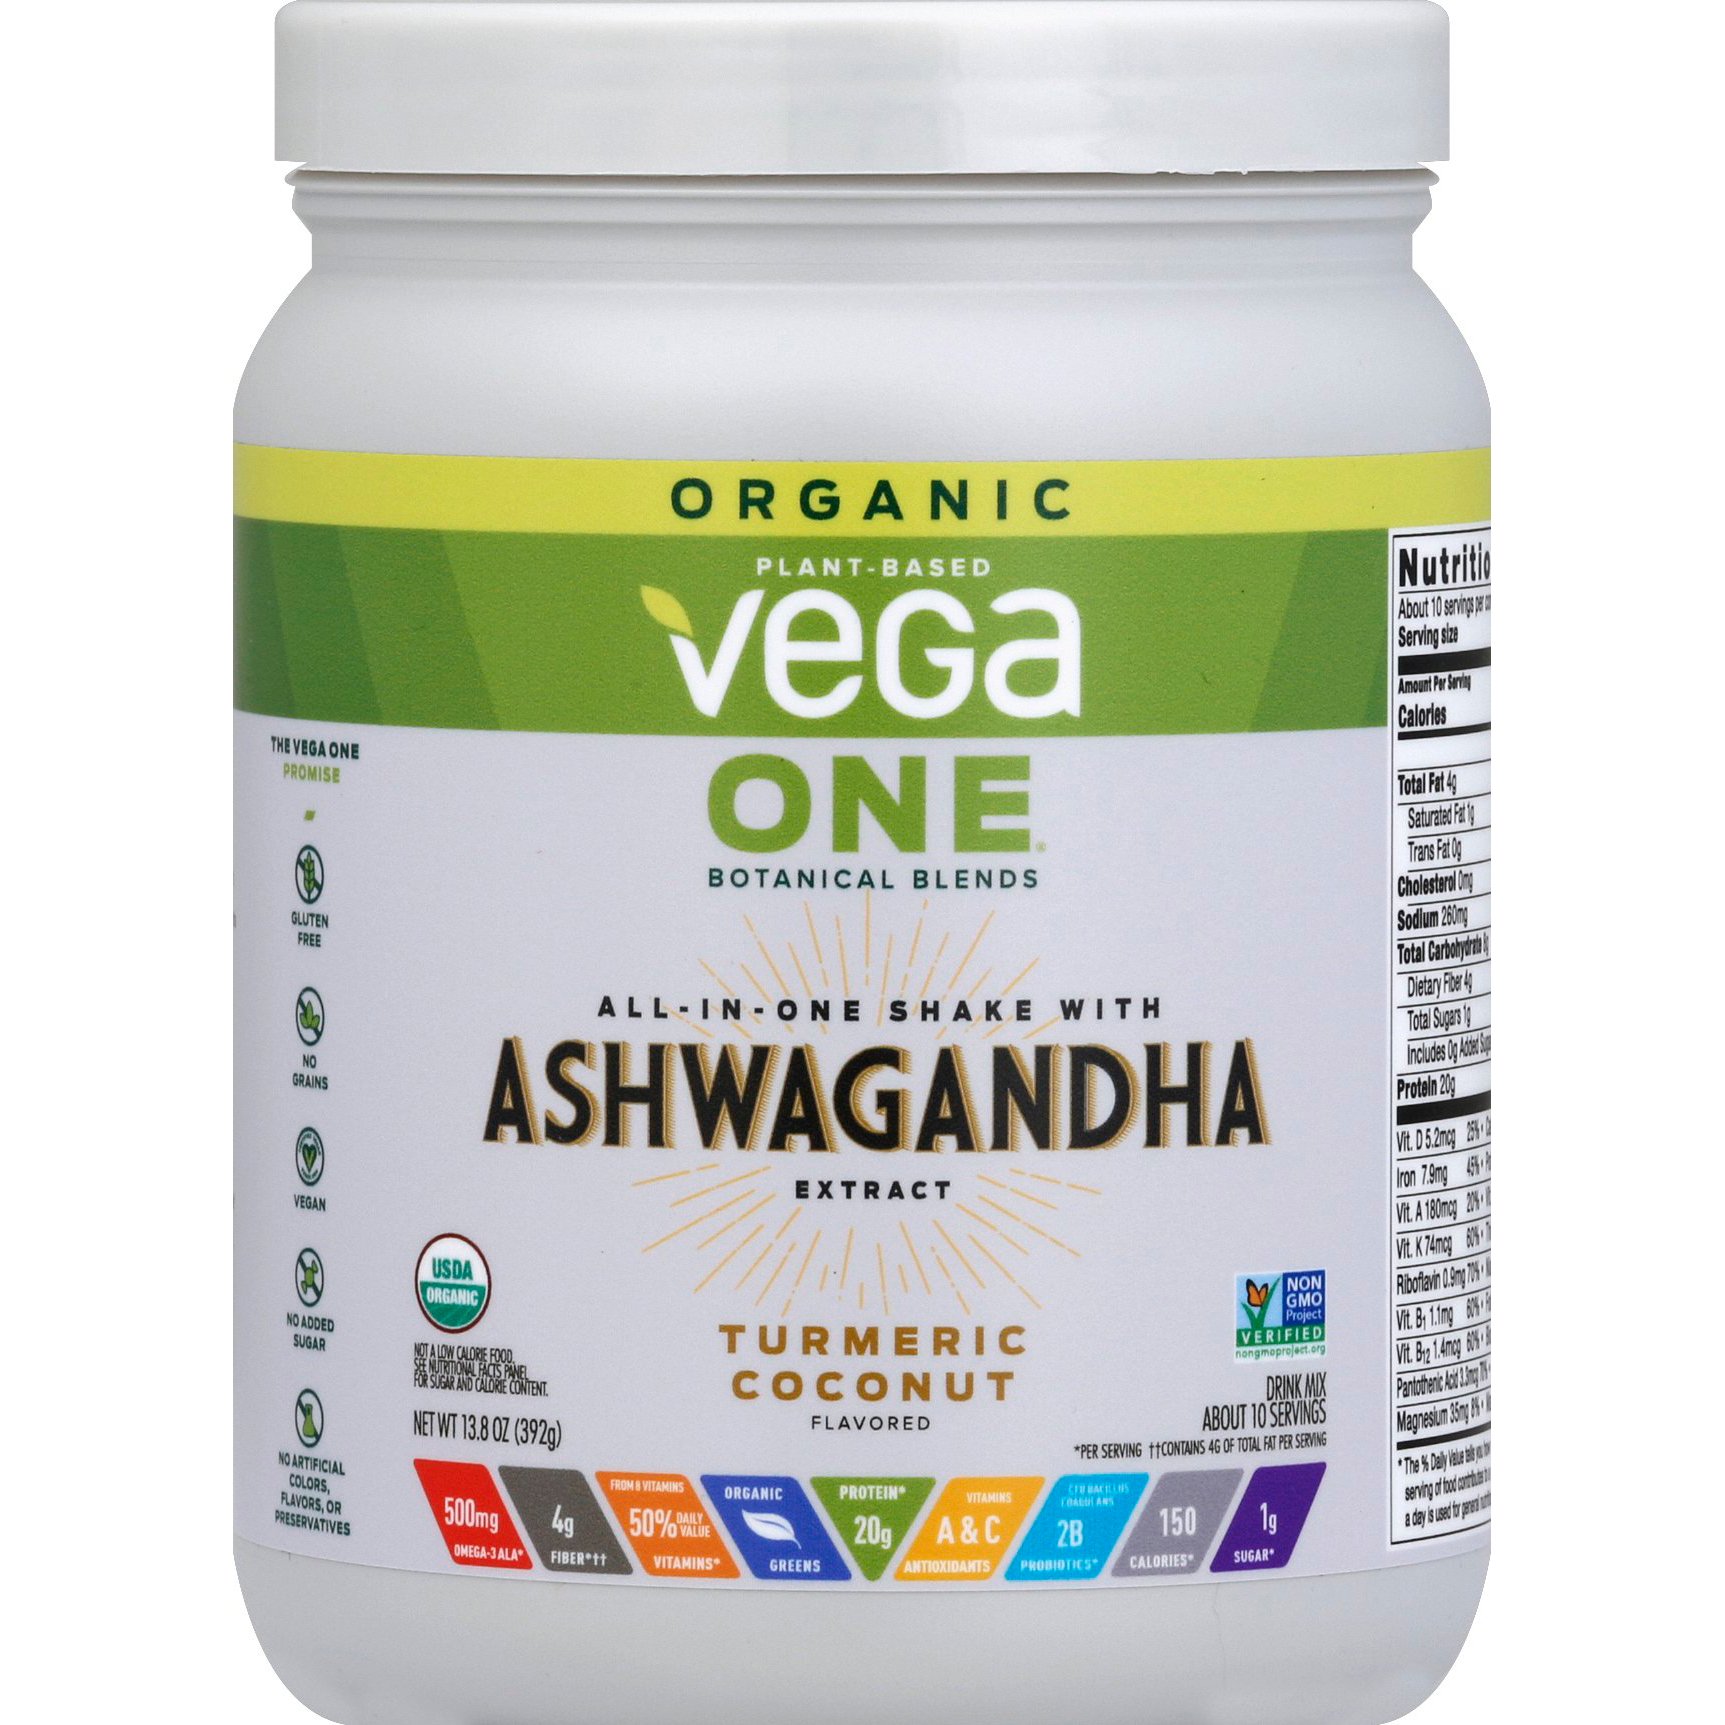 what not to mix with ashwagandha